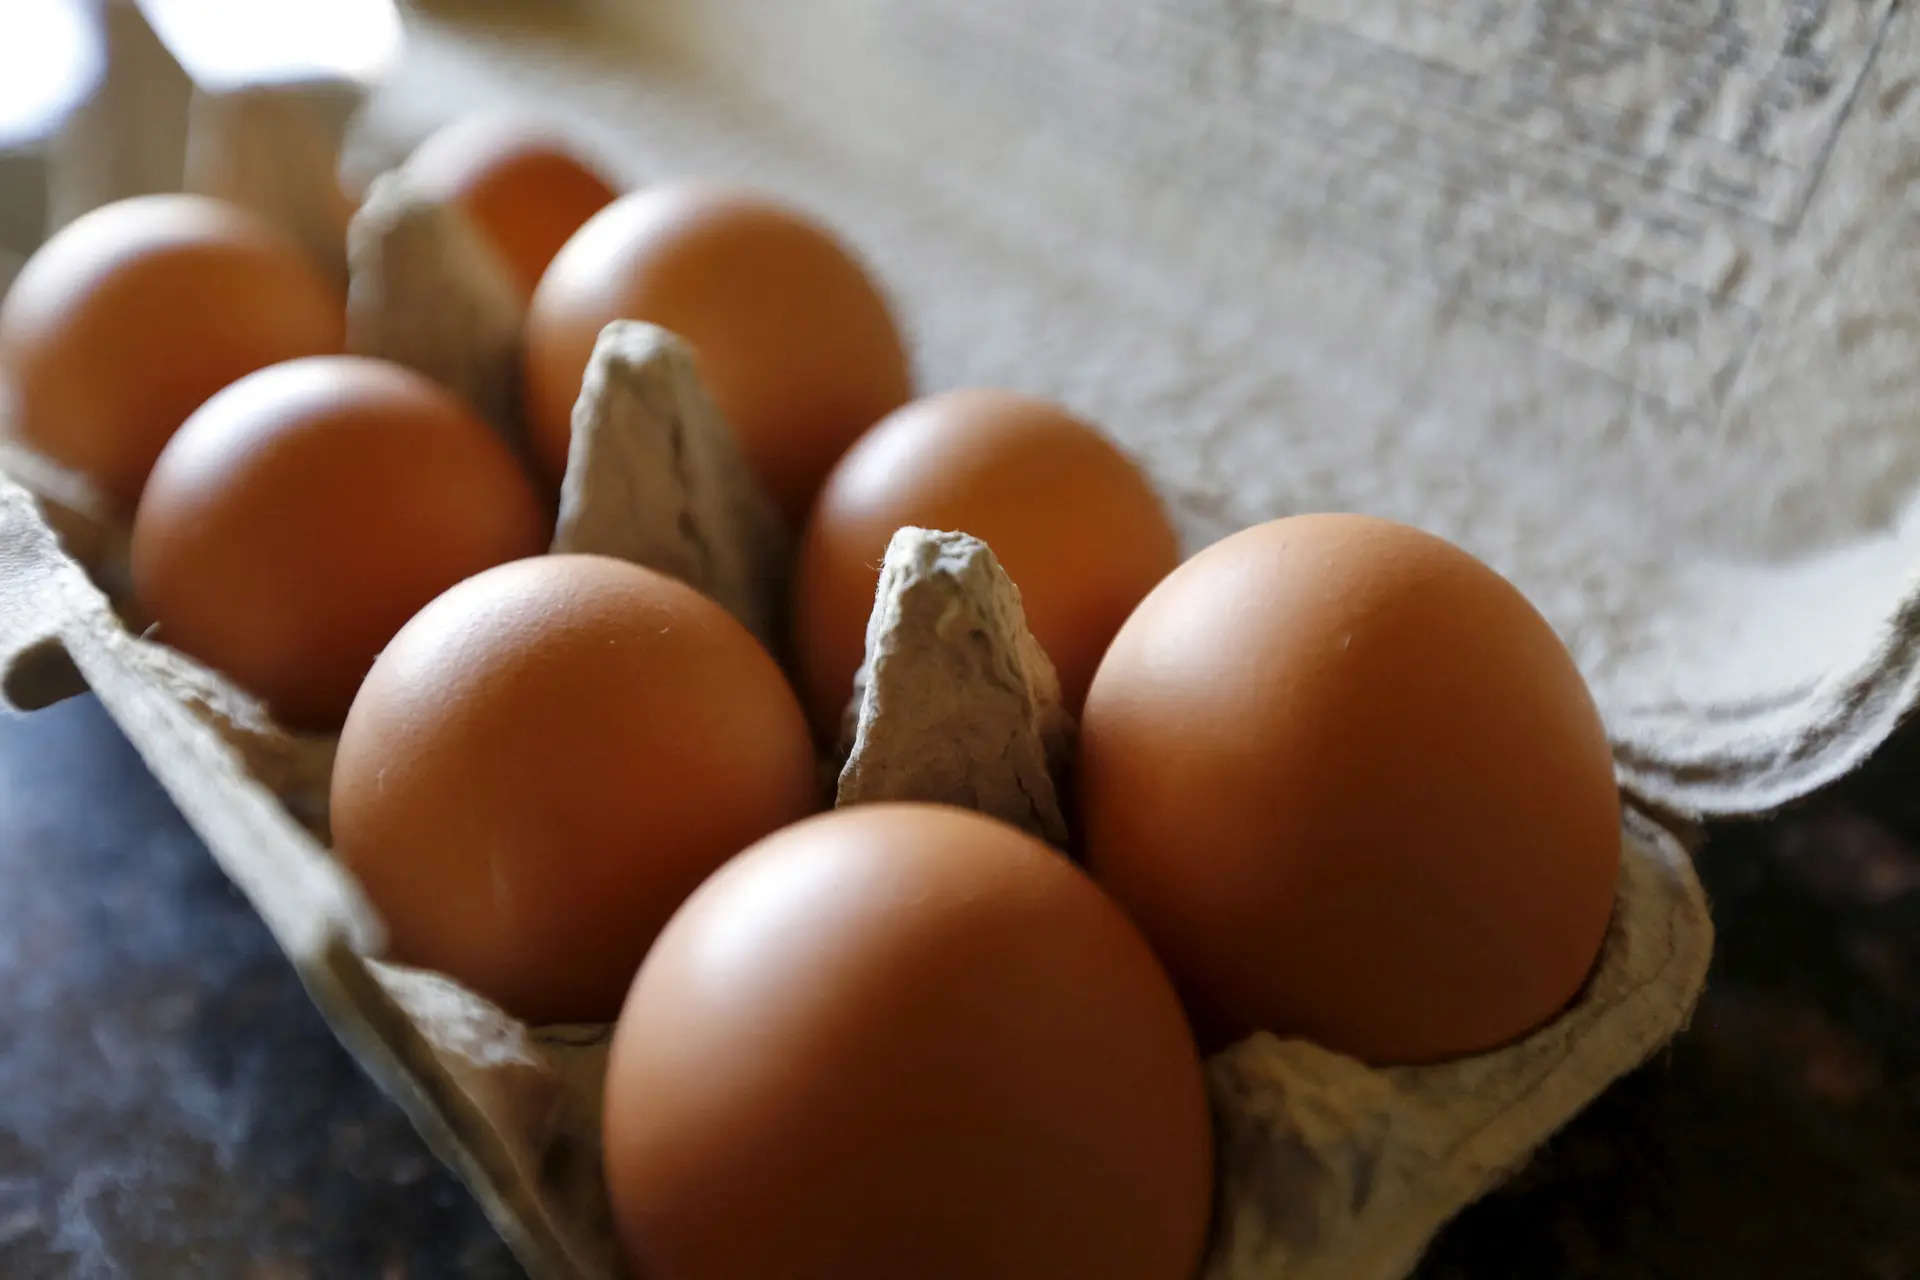 Students of govt, govt-aided schools in Karnataka to get eggs six days a week 